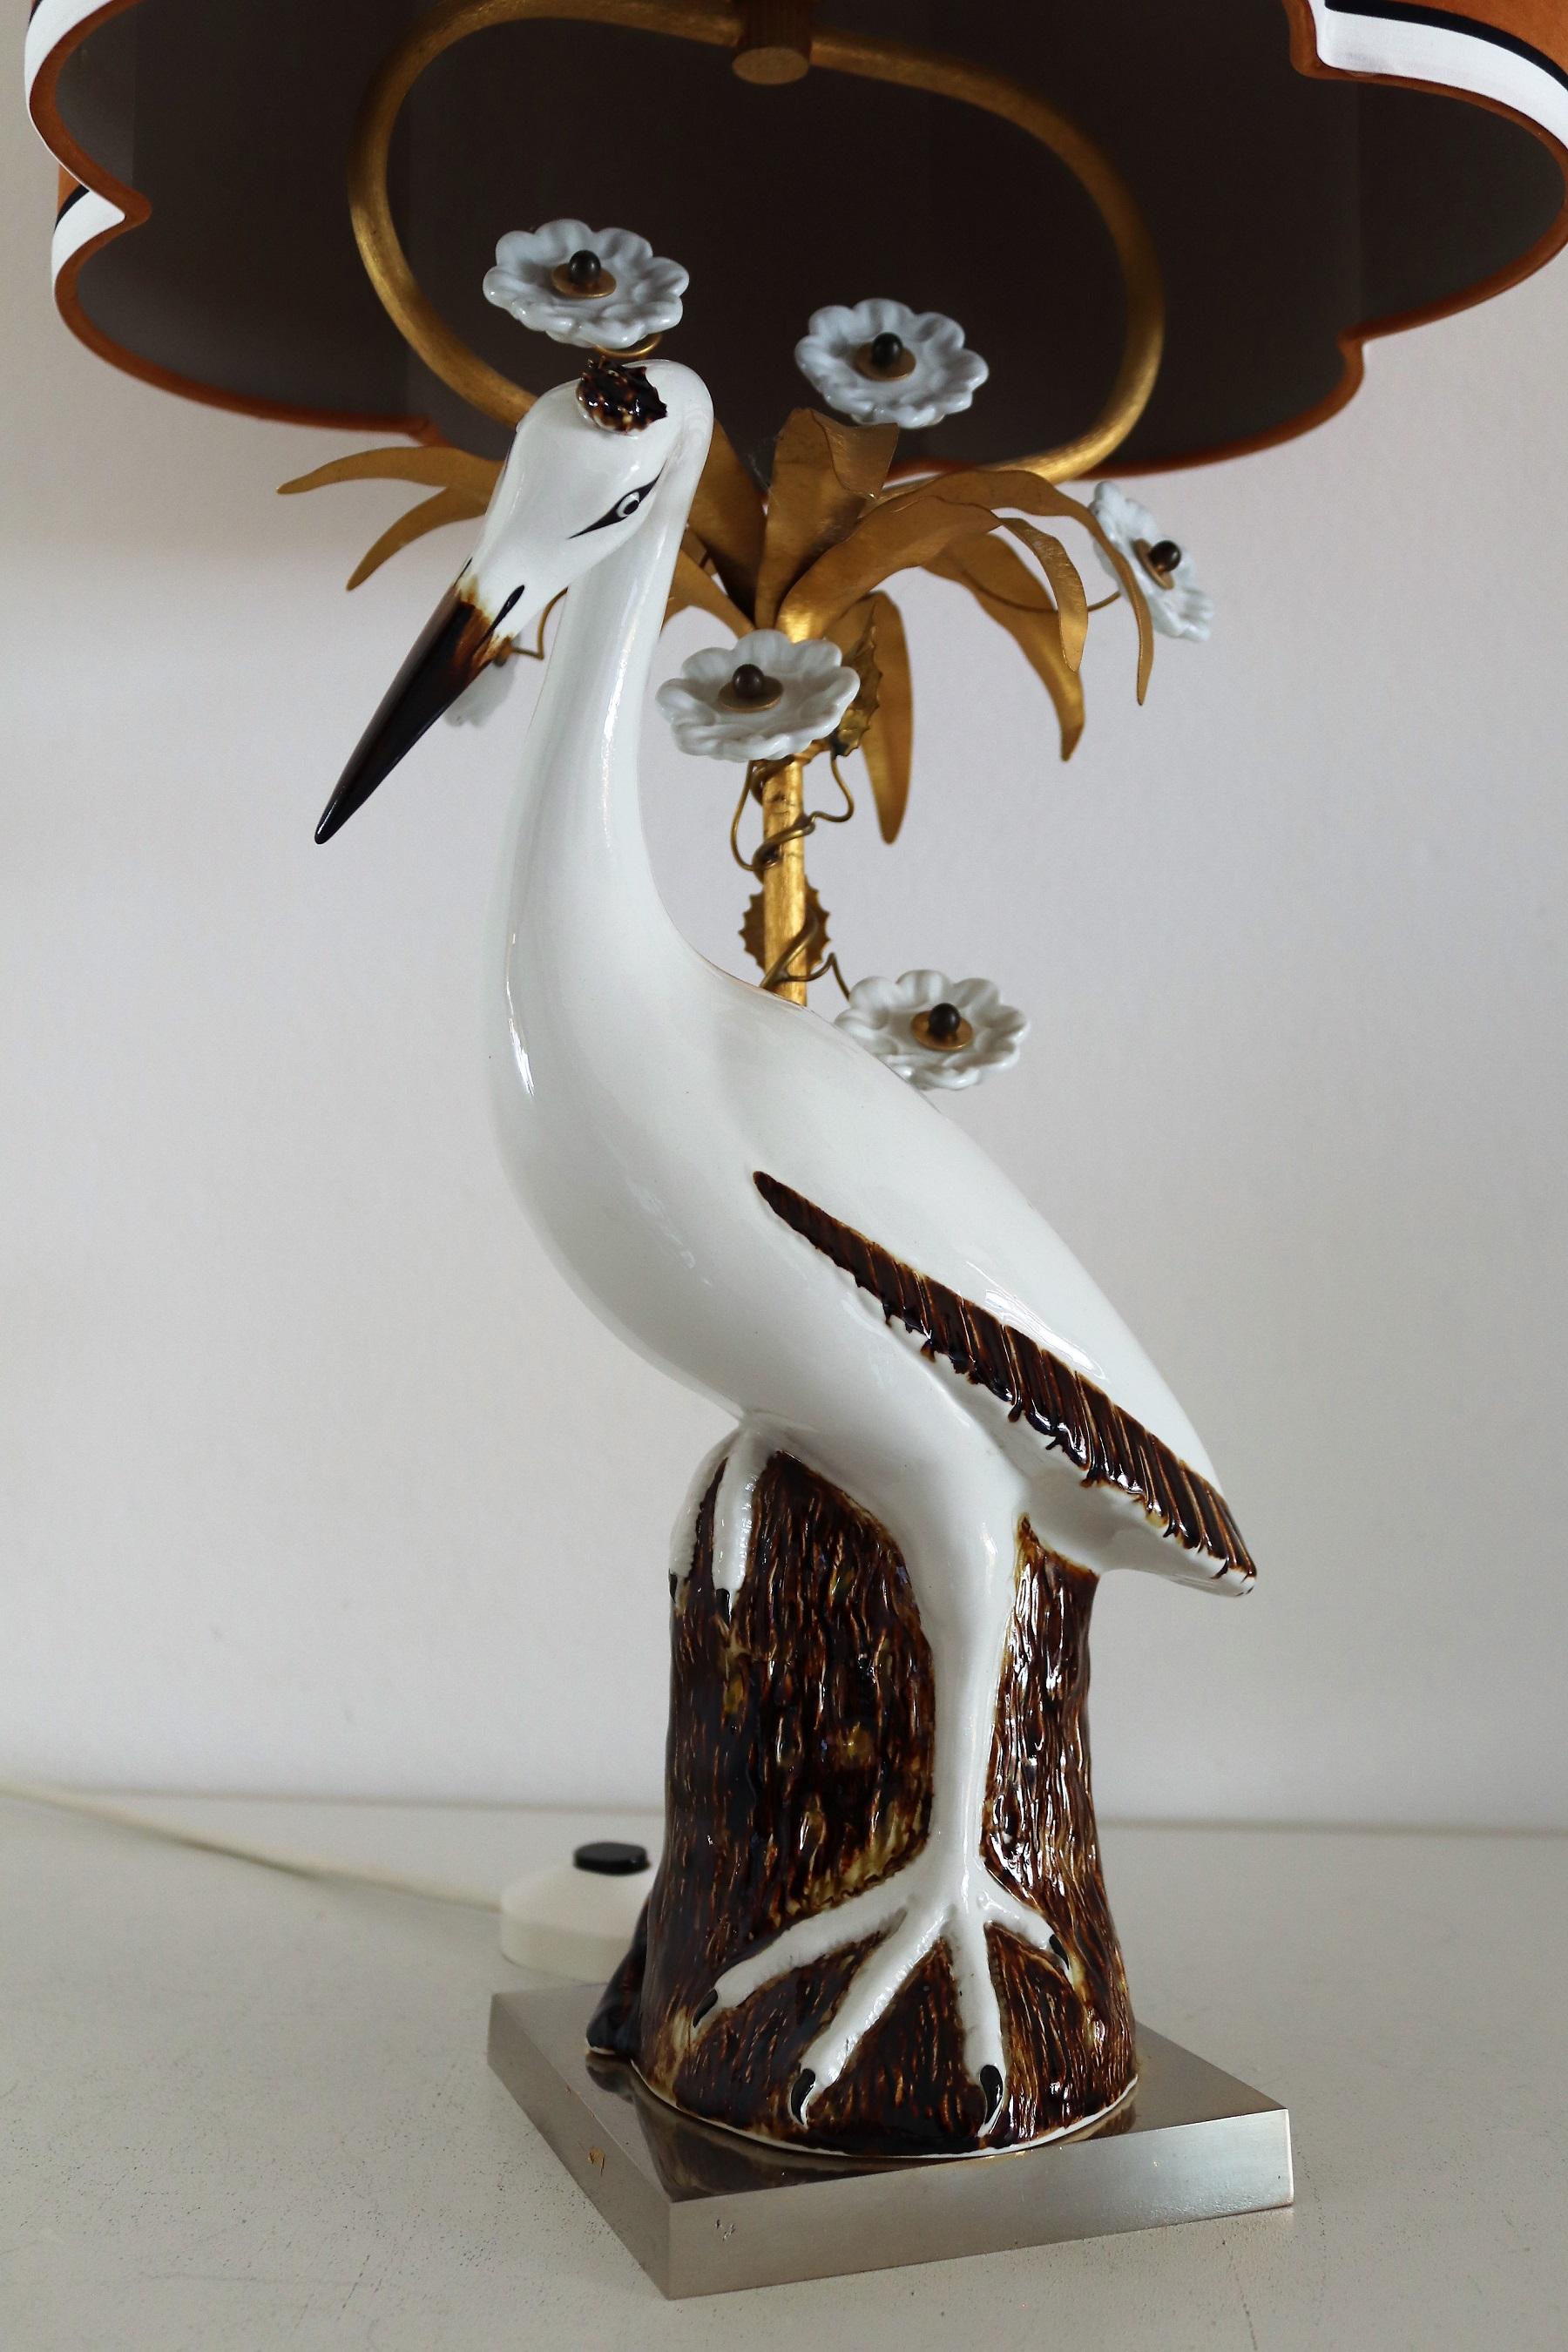 French Table Lamp with Porcelain Crane or Heron and Flowers, 1970s For Sale 4